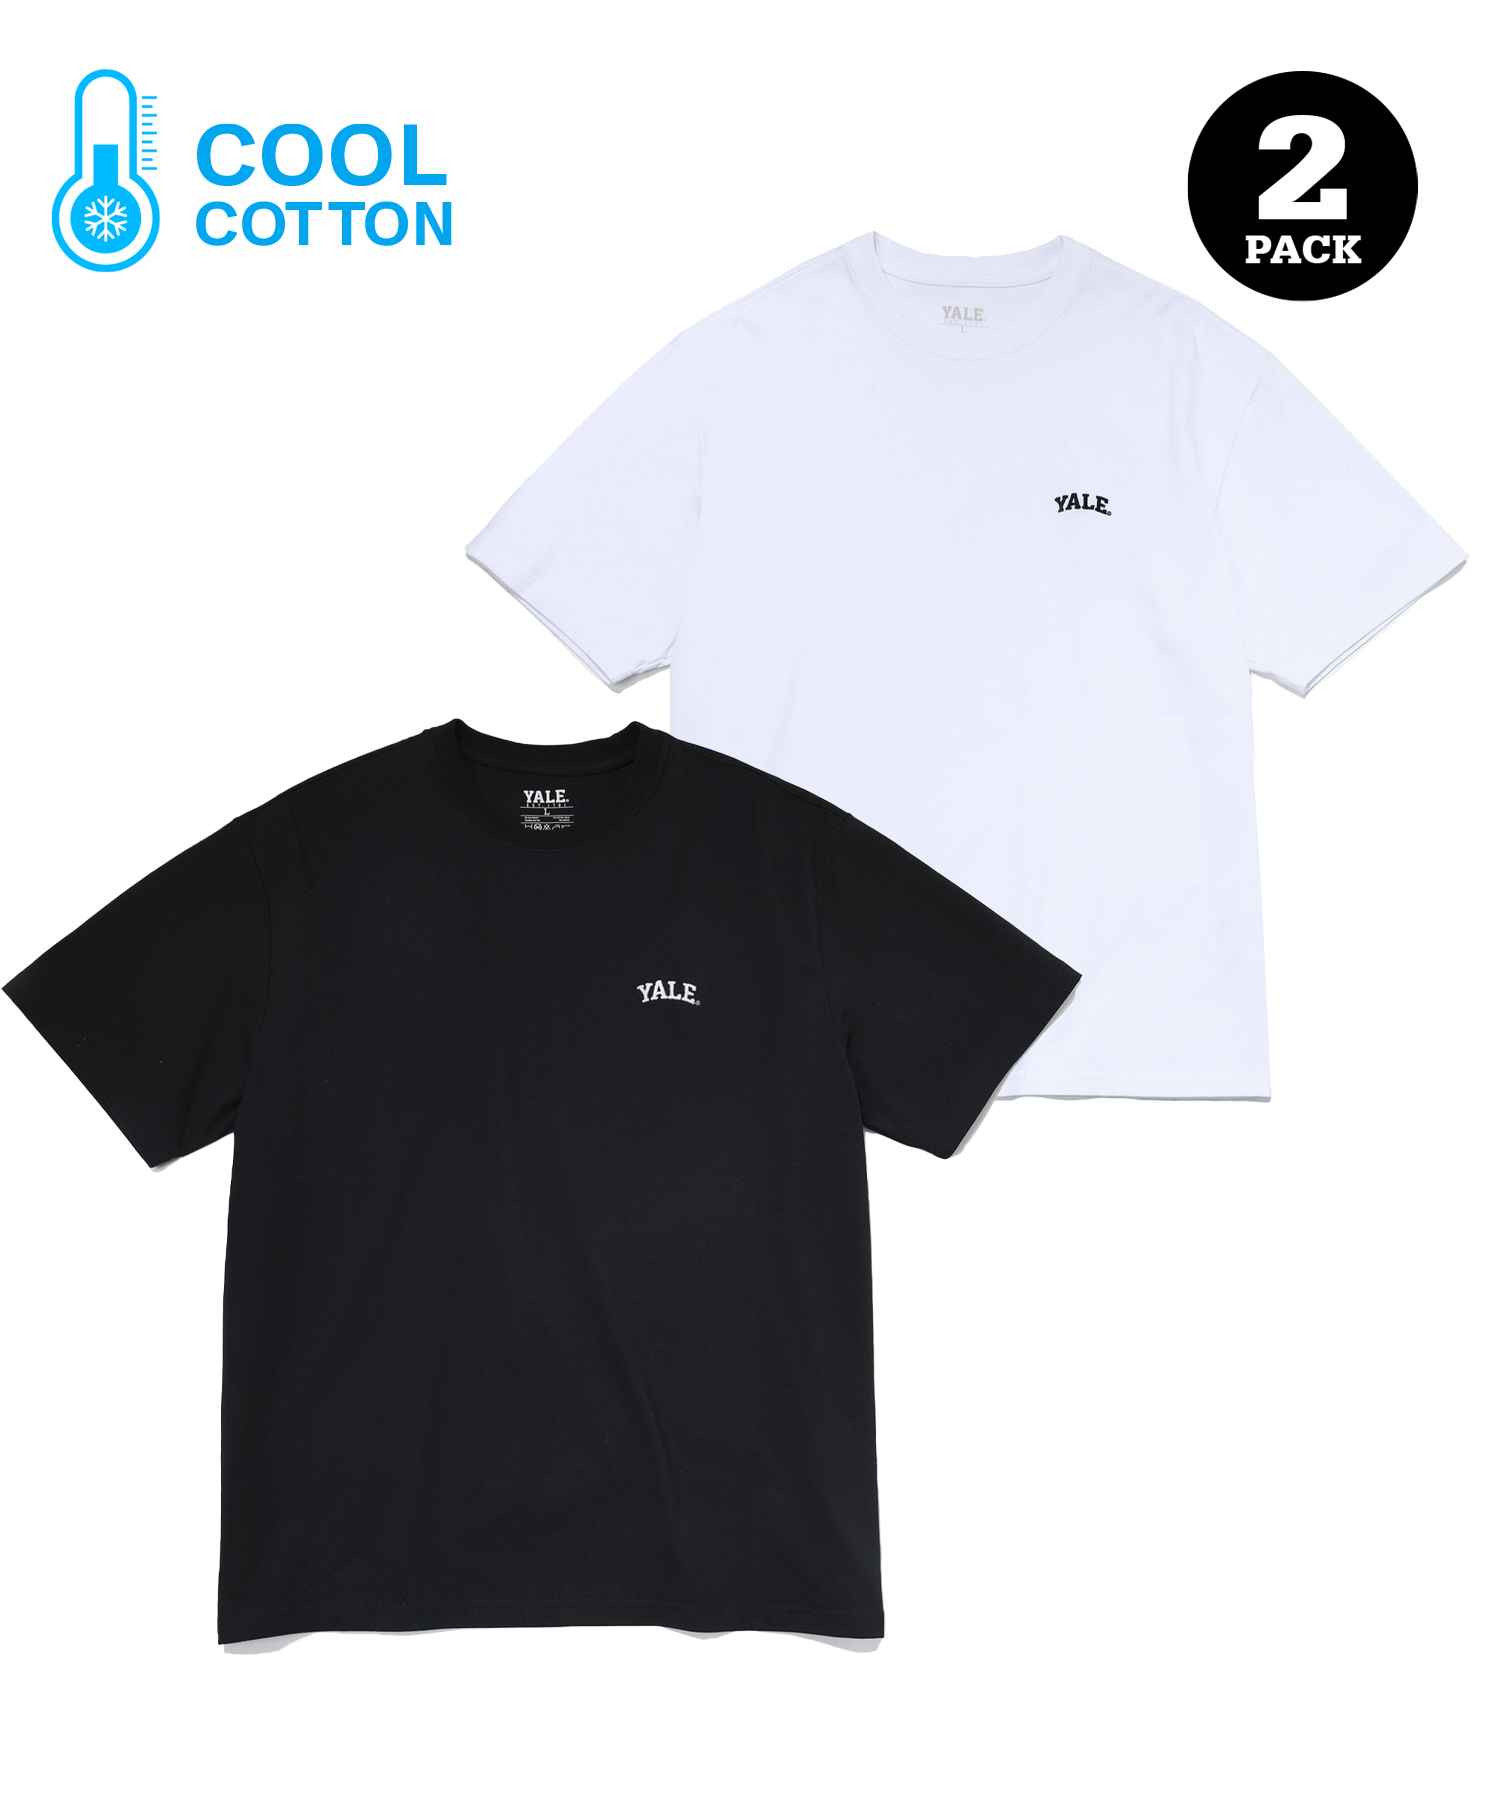 [COOL COTTON] 2PACK SMALL ARCH LOGO TEE WHITE / BLACK